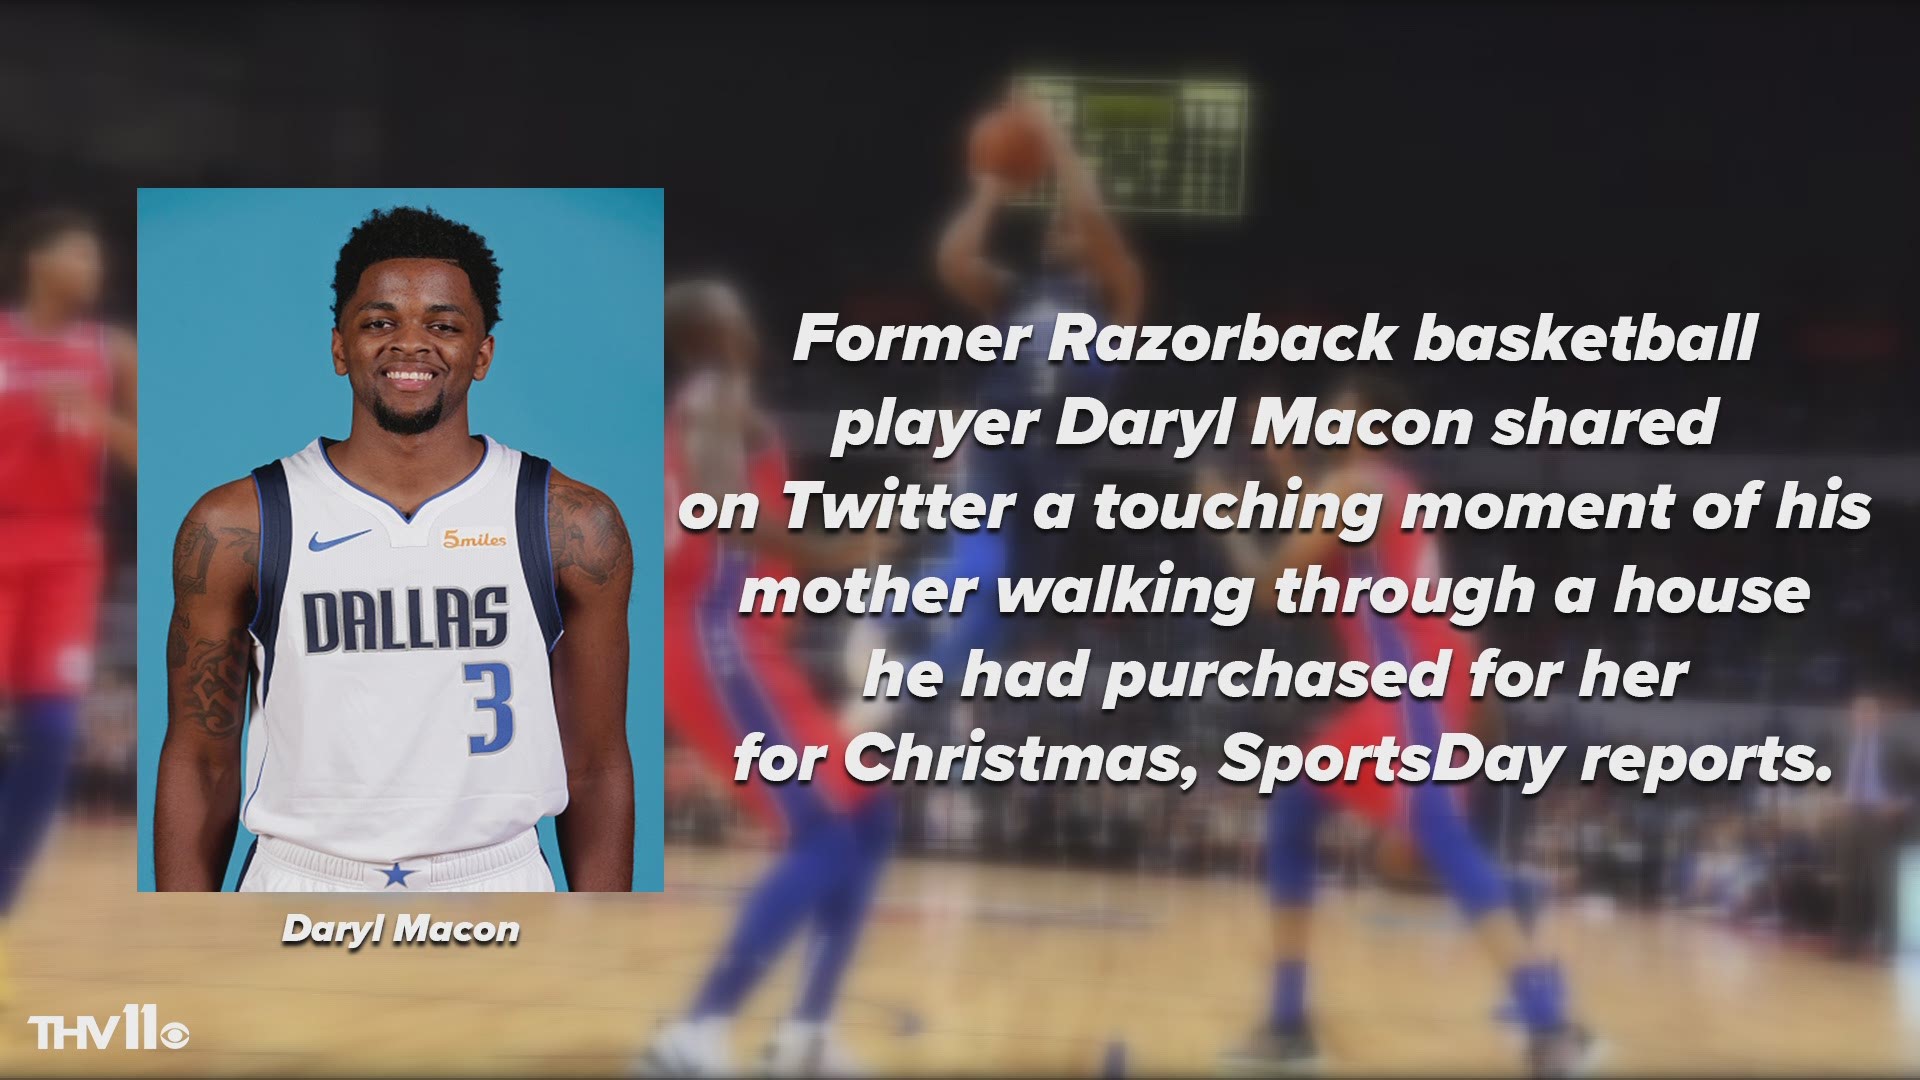 Former Razorback Daryl Macon gives his mother an unforgettable Christmas gift